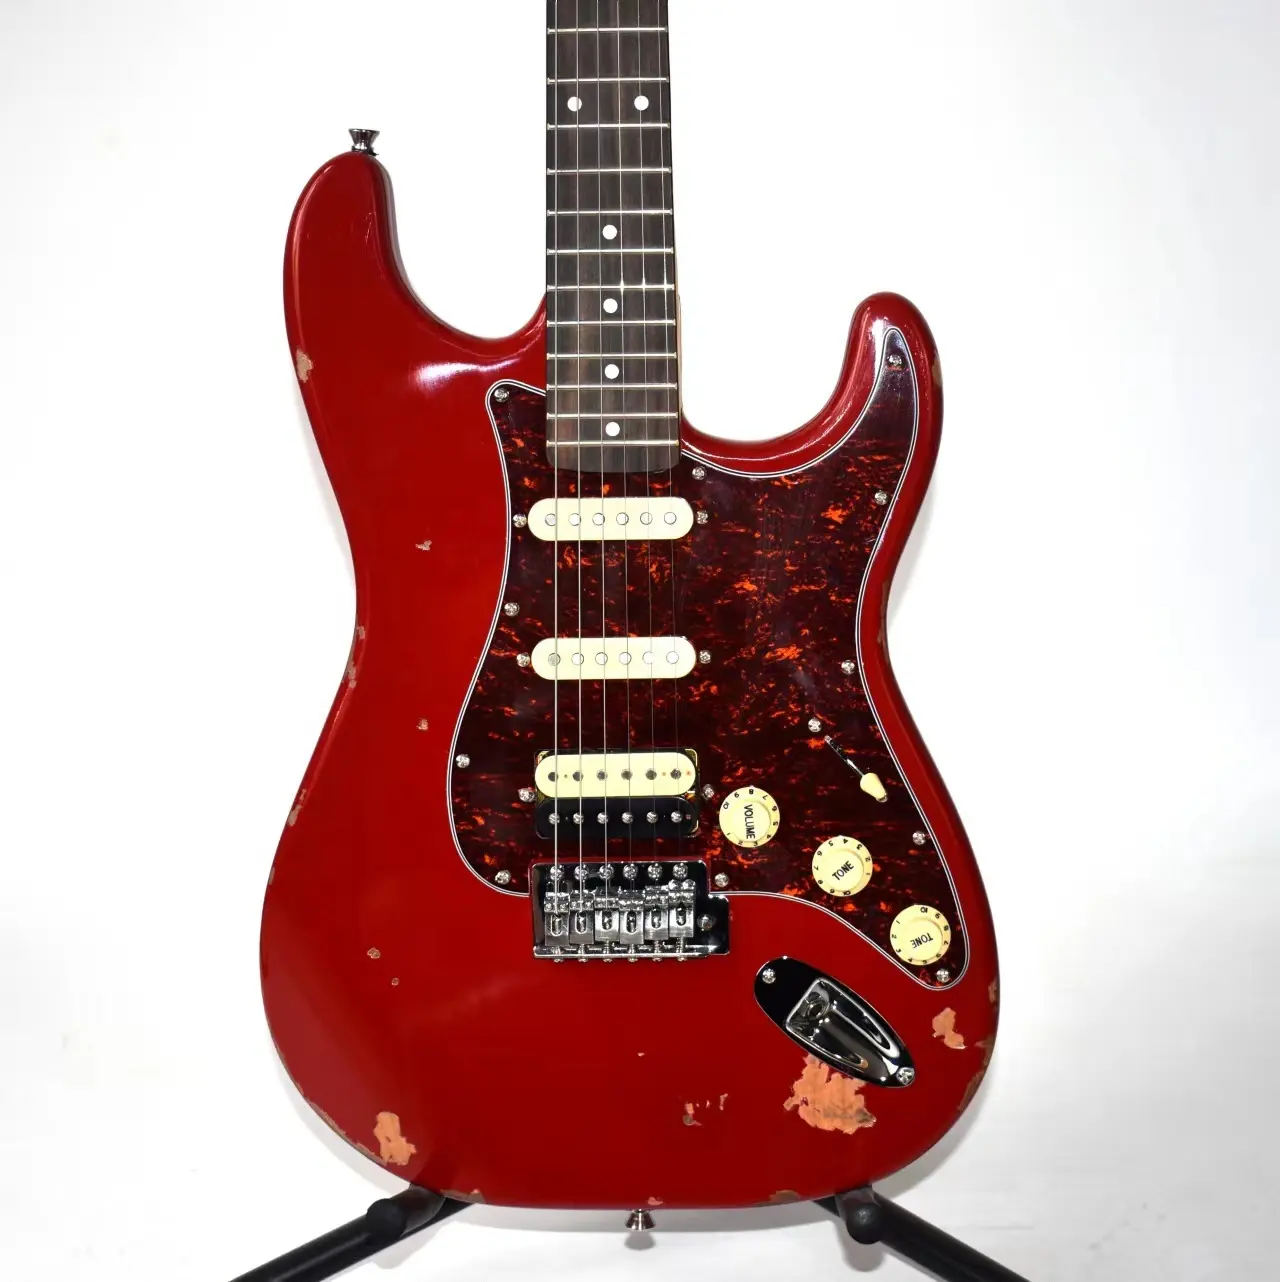 ZLG nitrocellulose lacquer heavy relic electric guitar 6 string red color alder body maple neck OEM guitar factory outlet